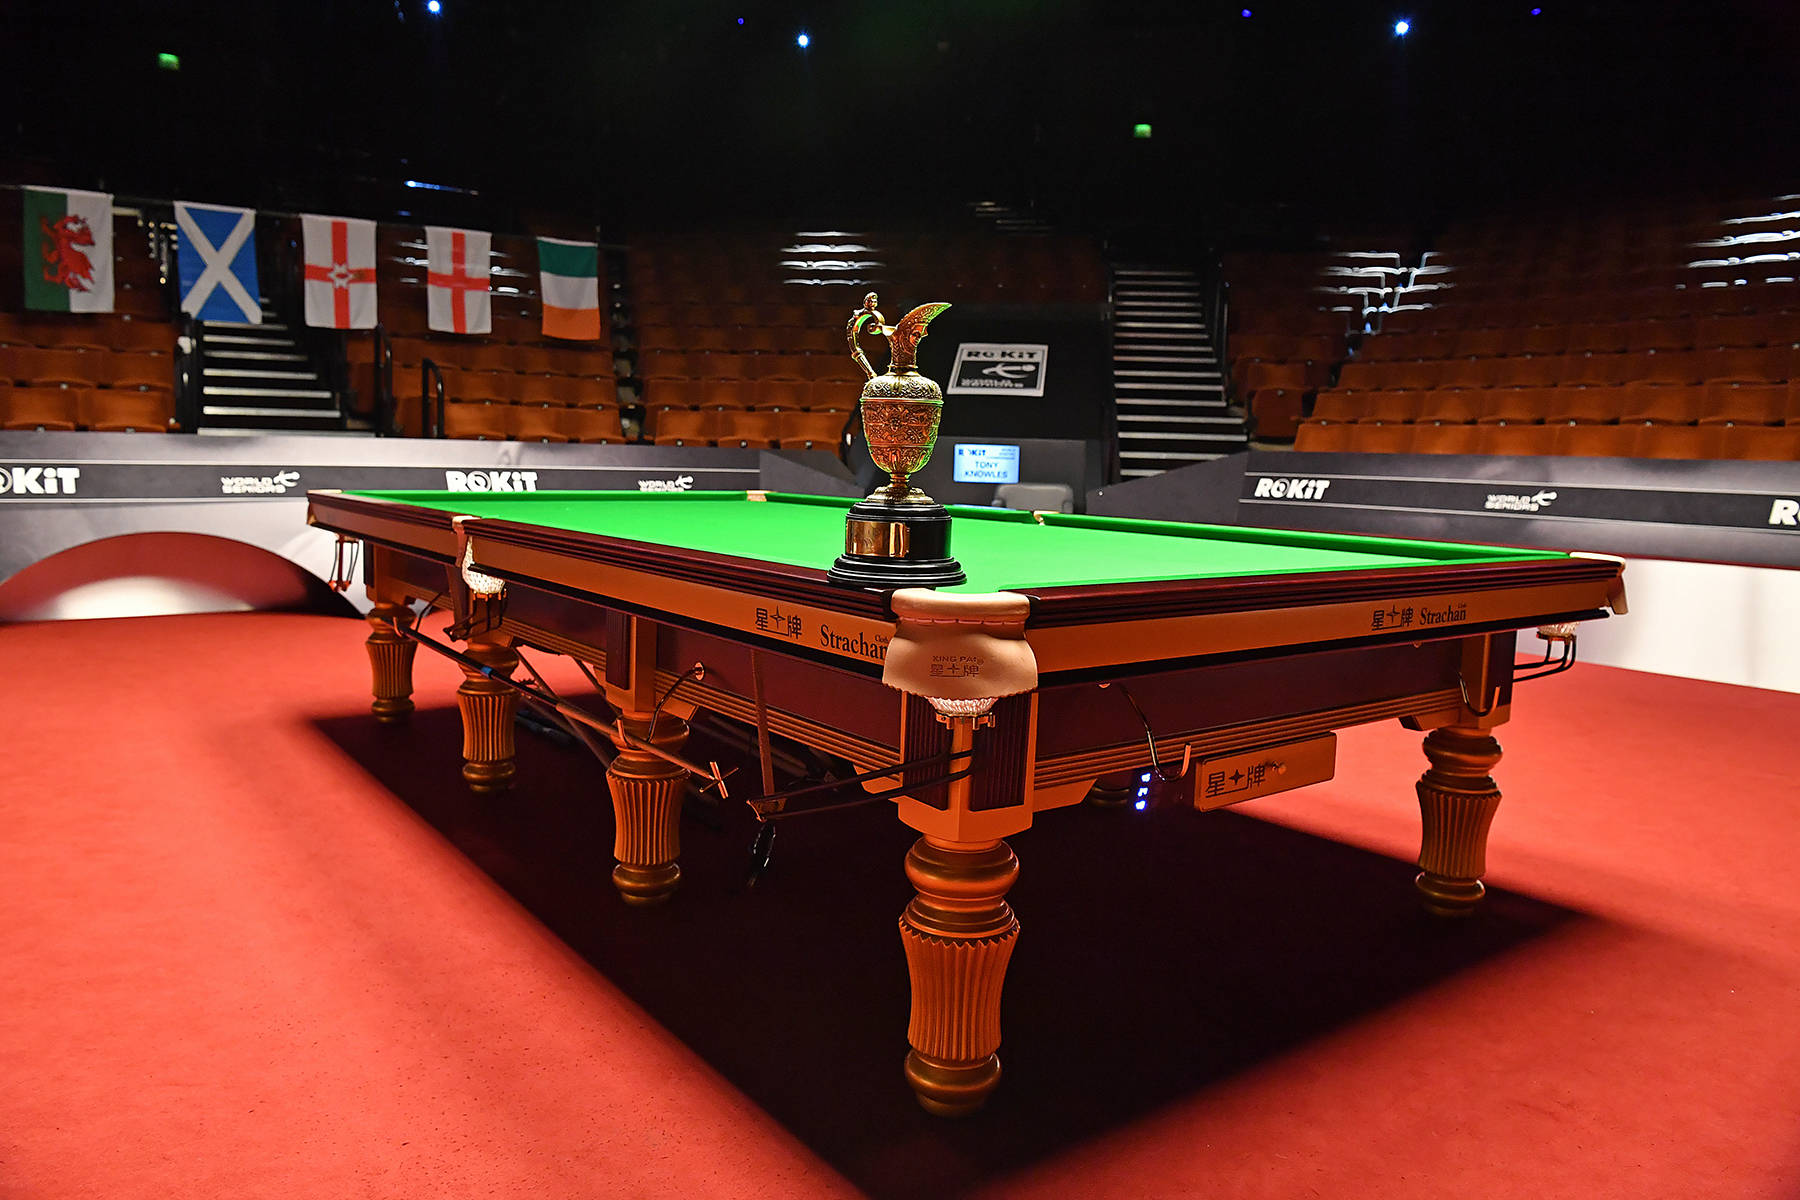 New Qualifying Dates Announced for 2022 World Seniors Championship